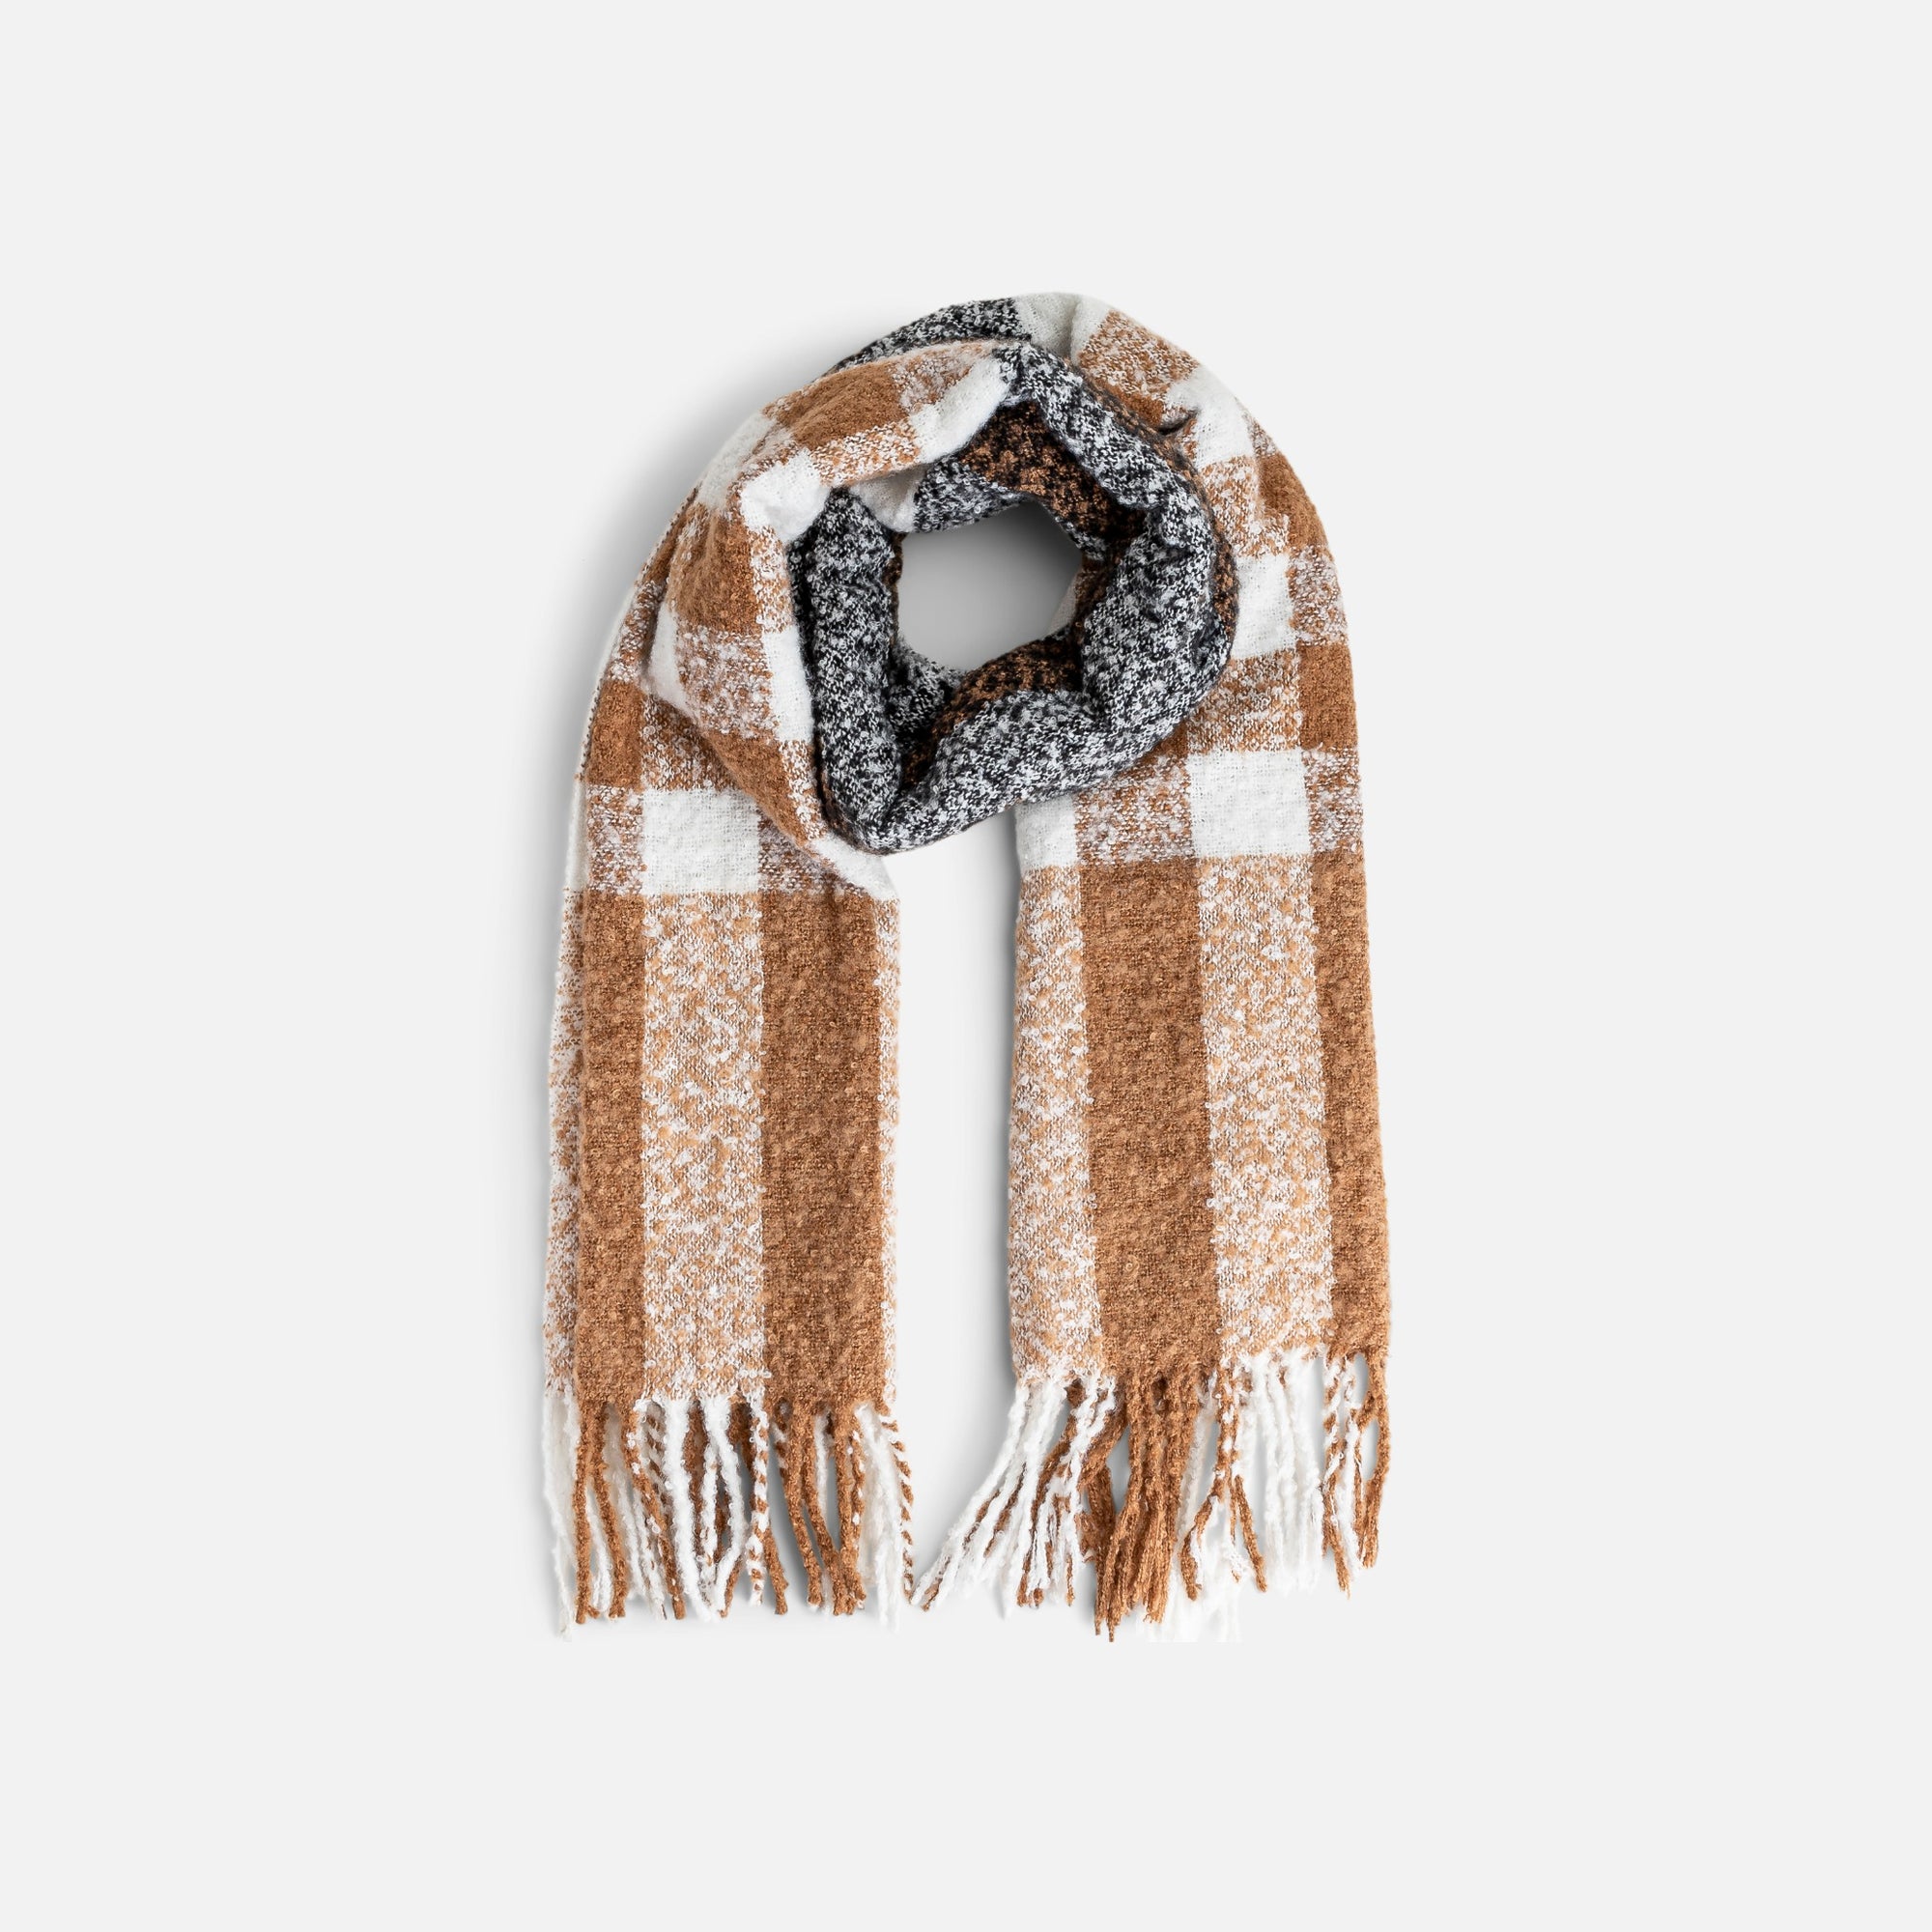 Cozy rust and black scarf